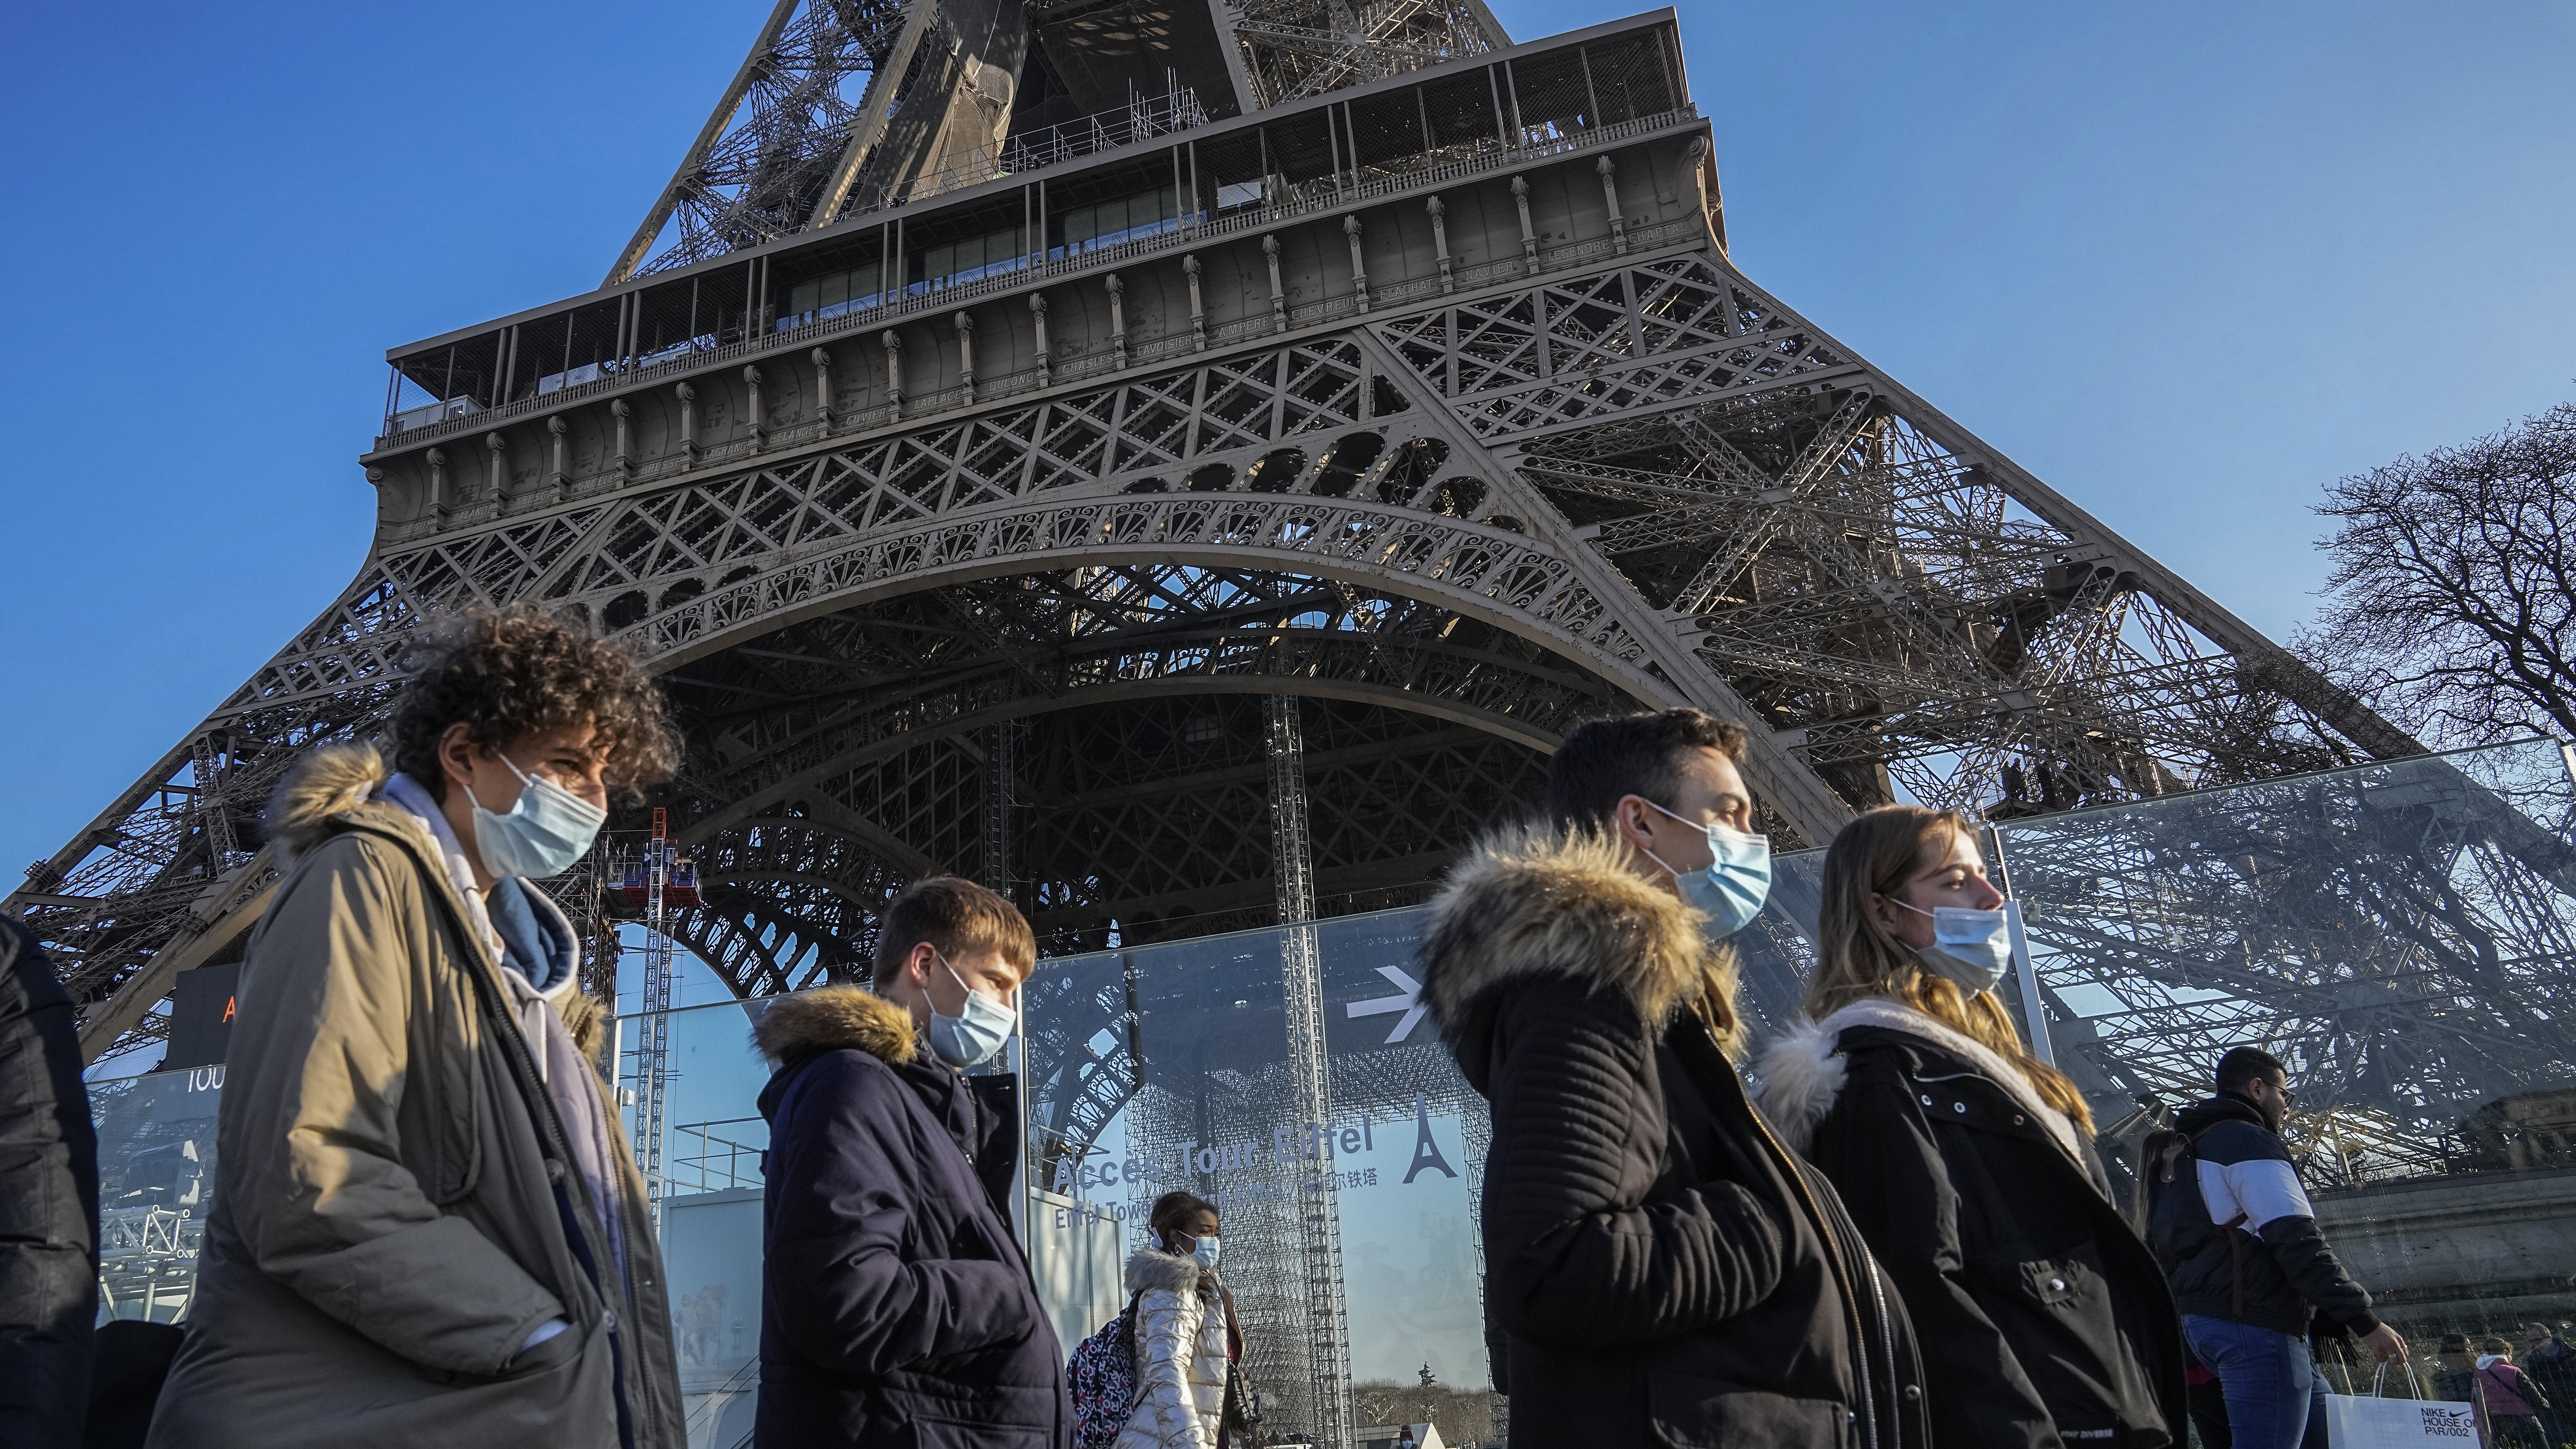 People wearing face masks to protect against COVID-19 walk past the Eiffel Tower in Paris, 